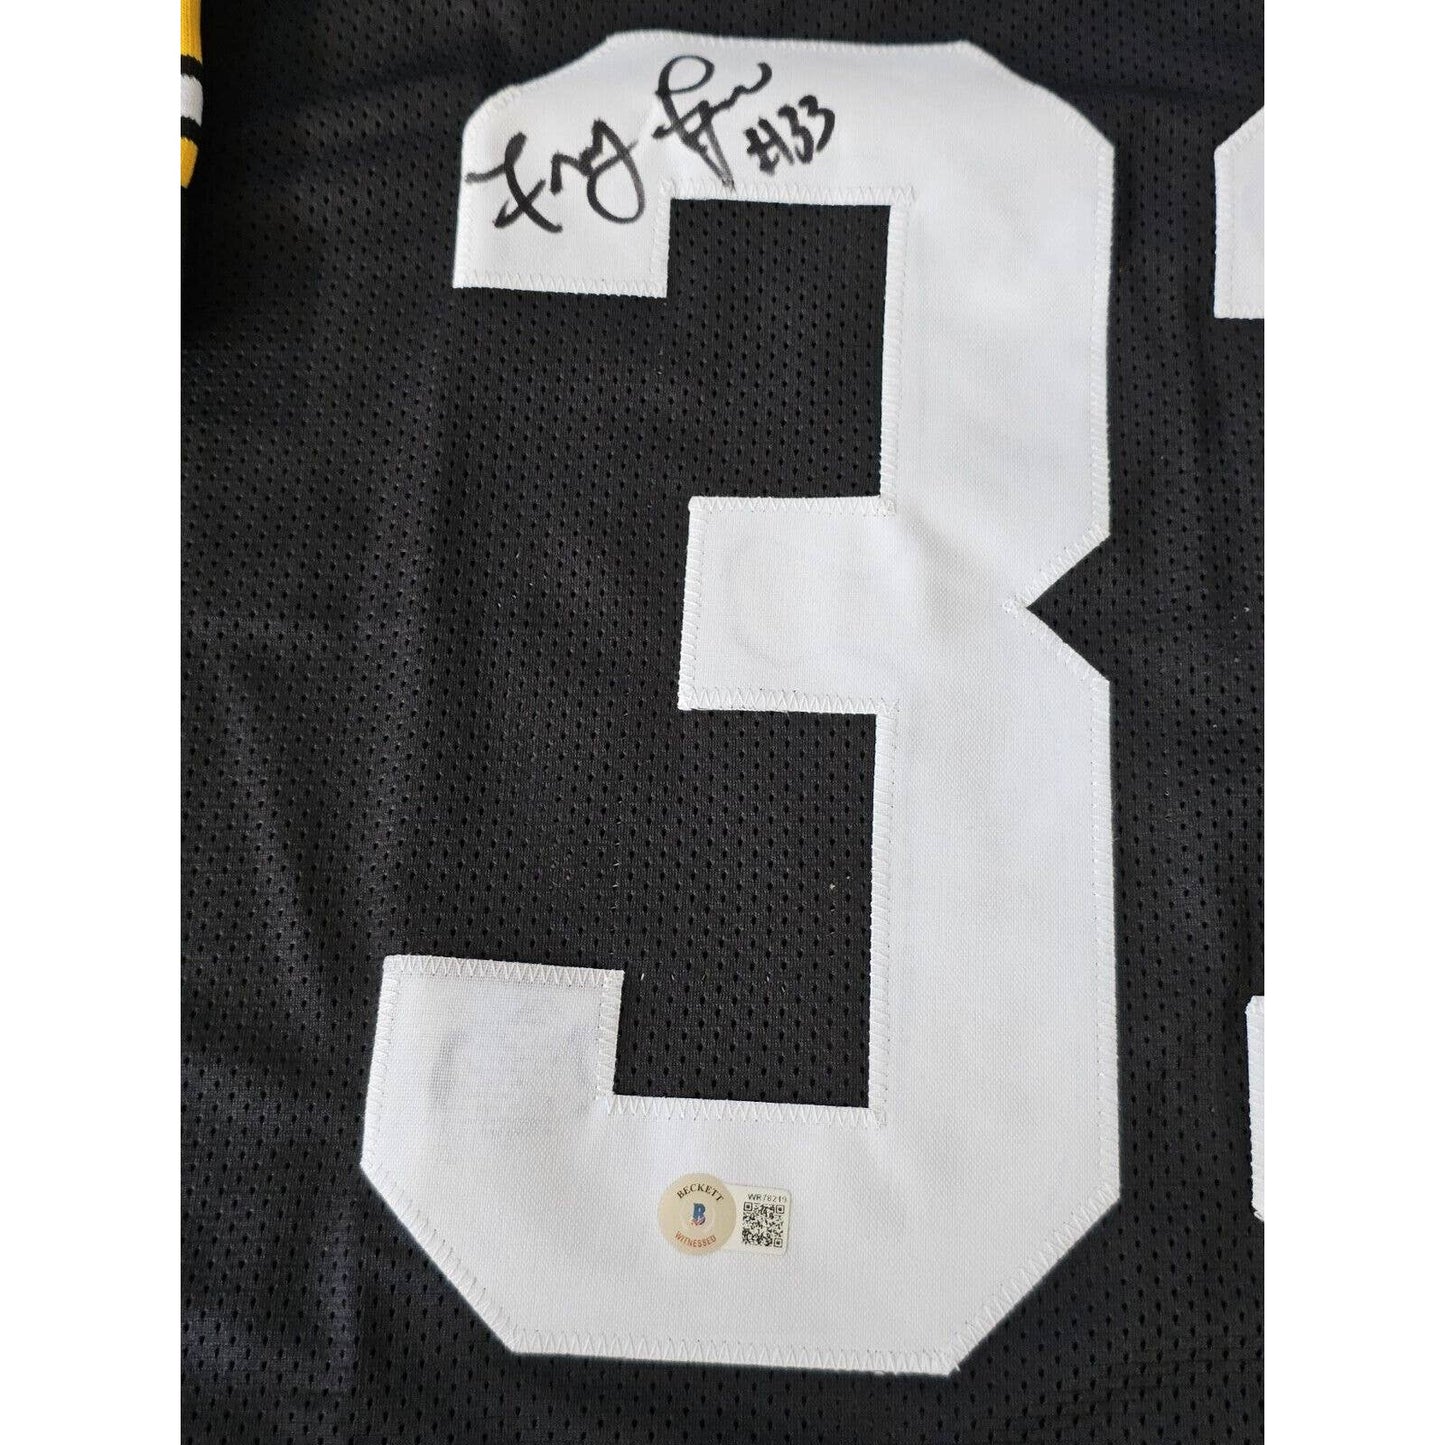 John Frenchy Fuqua Autographed/Signed Jersey Beckett Sticker Pittsburgh Steelers